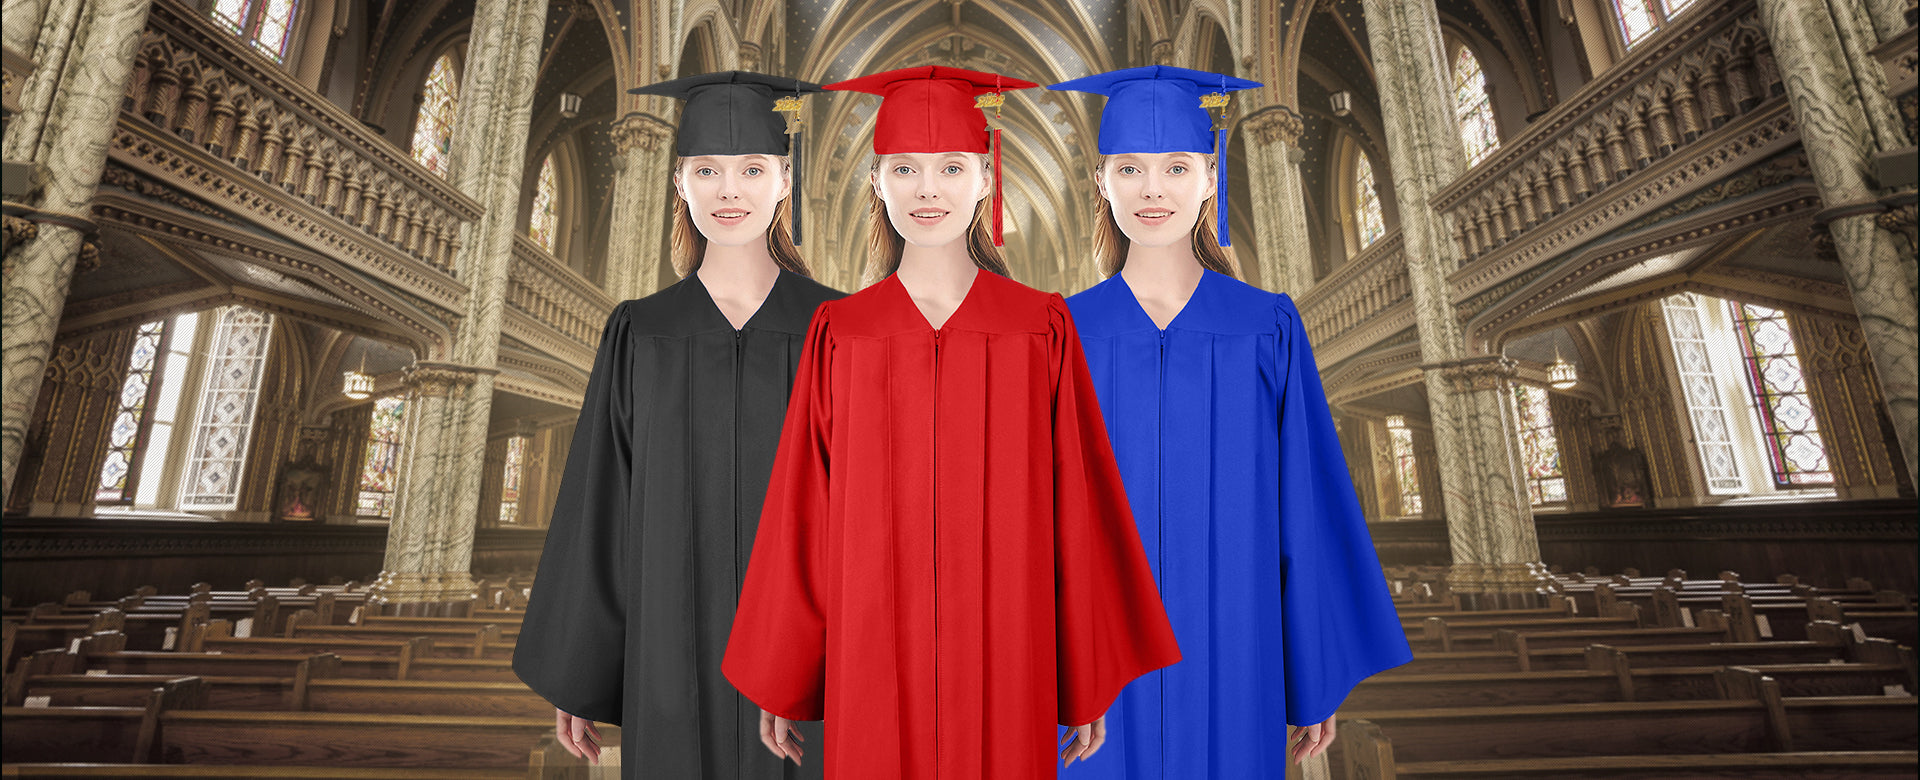 Convocation Gowns and graduation caps that matches your convocation